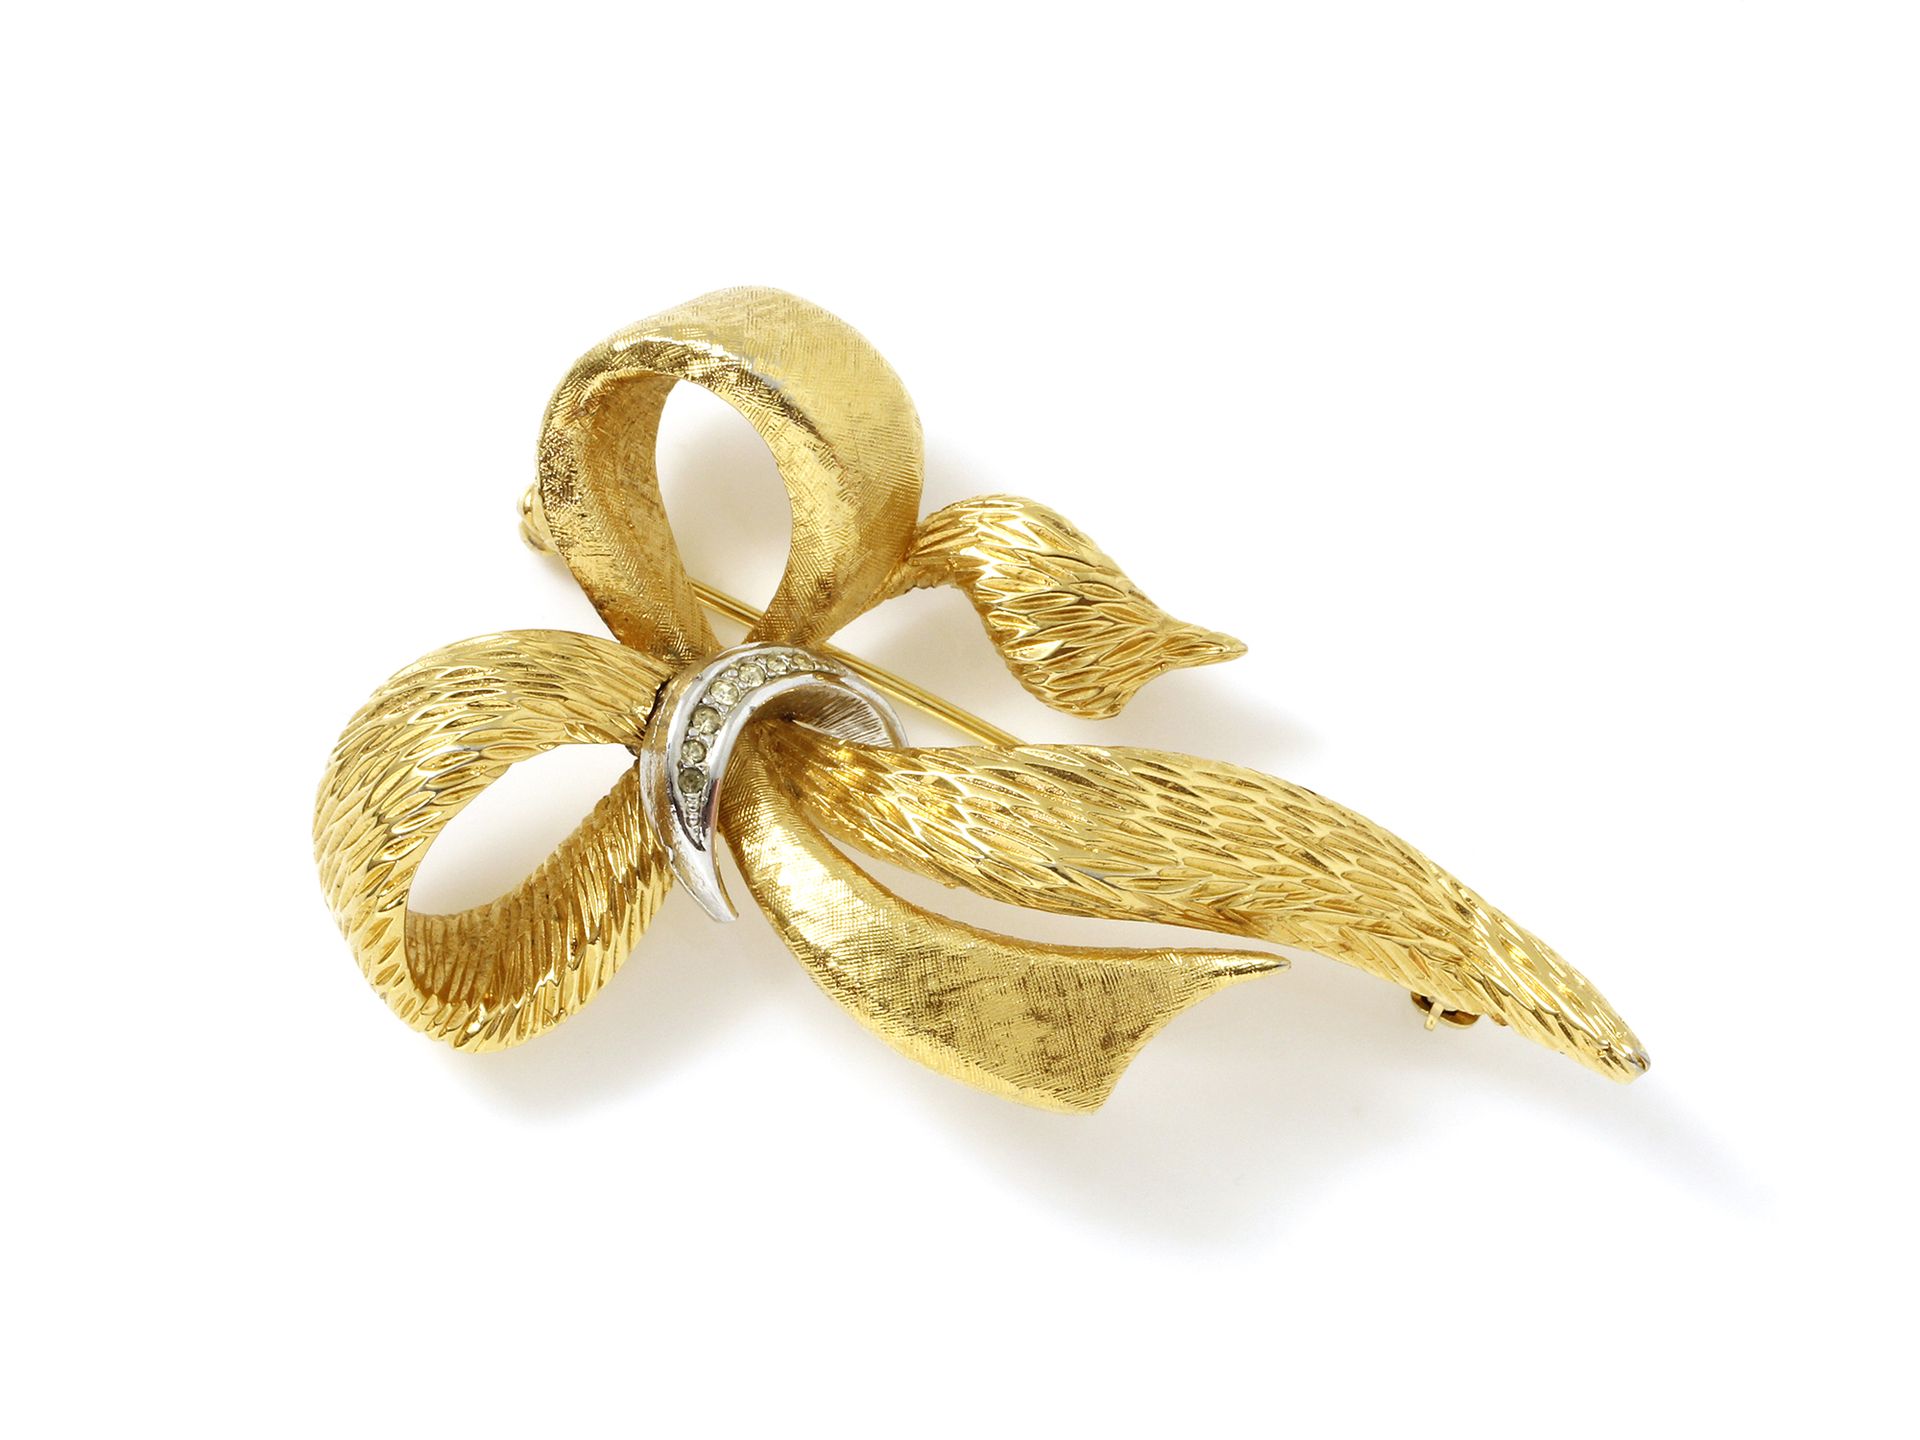 Null D'ORLAN

Fancy brooch featuring a gilded metal knot, the center decorated w&hellip;